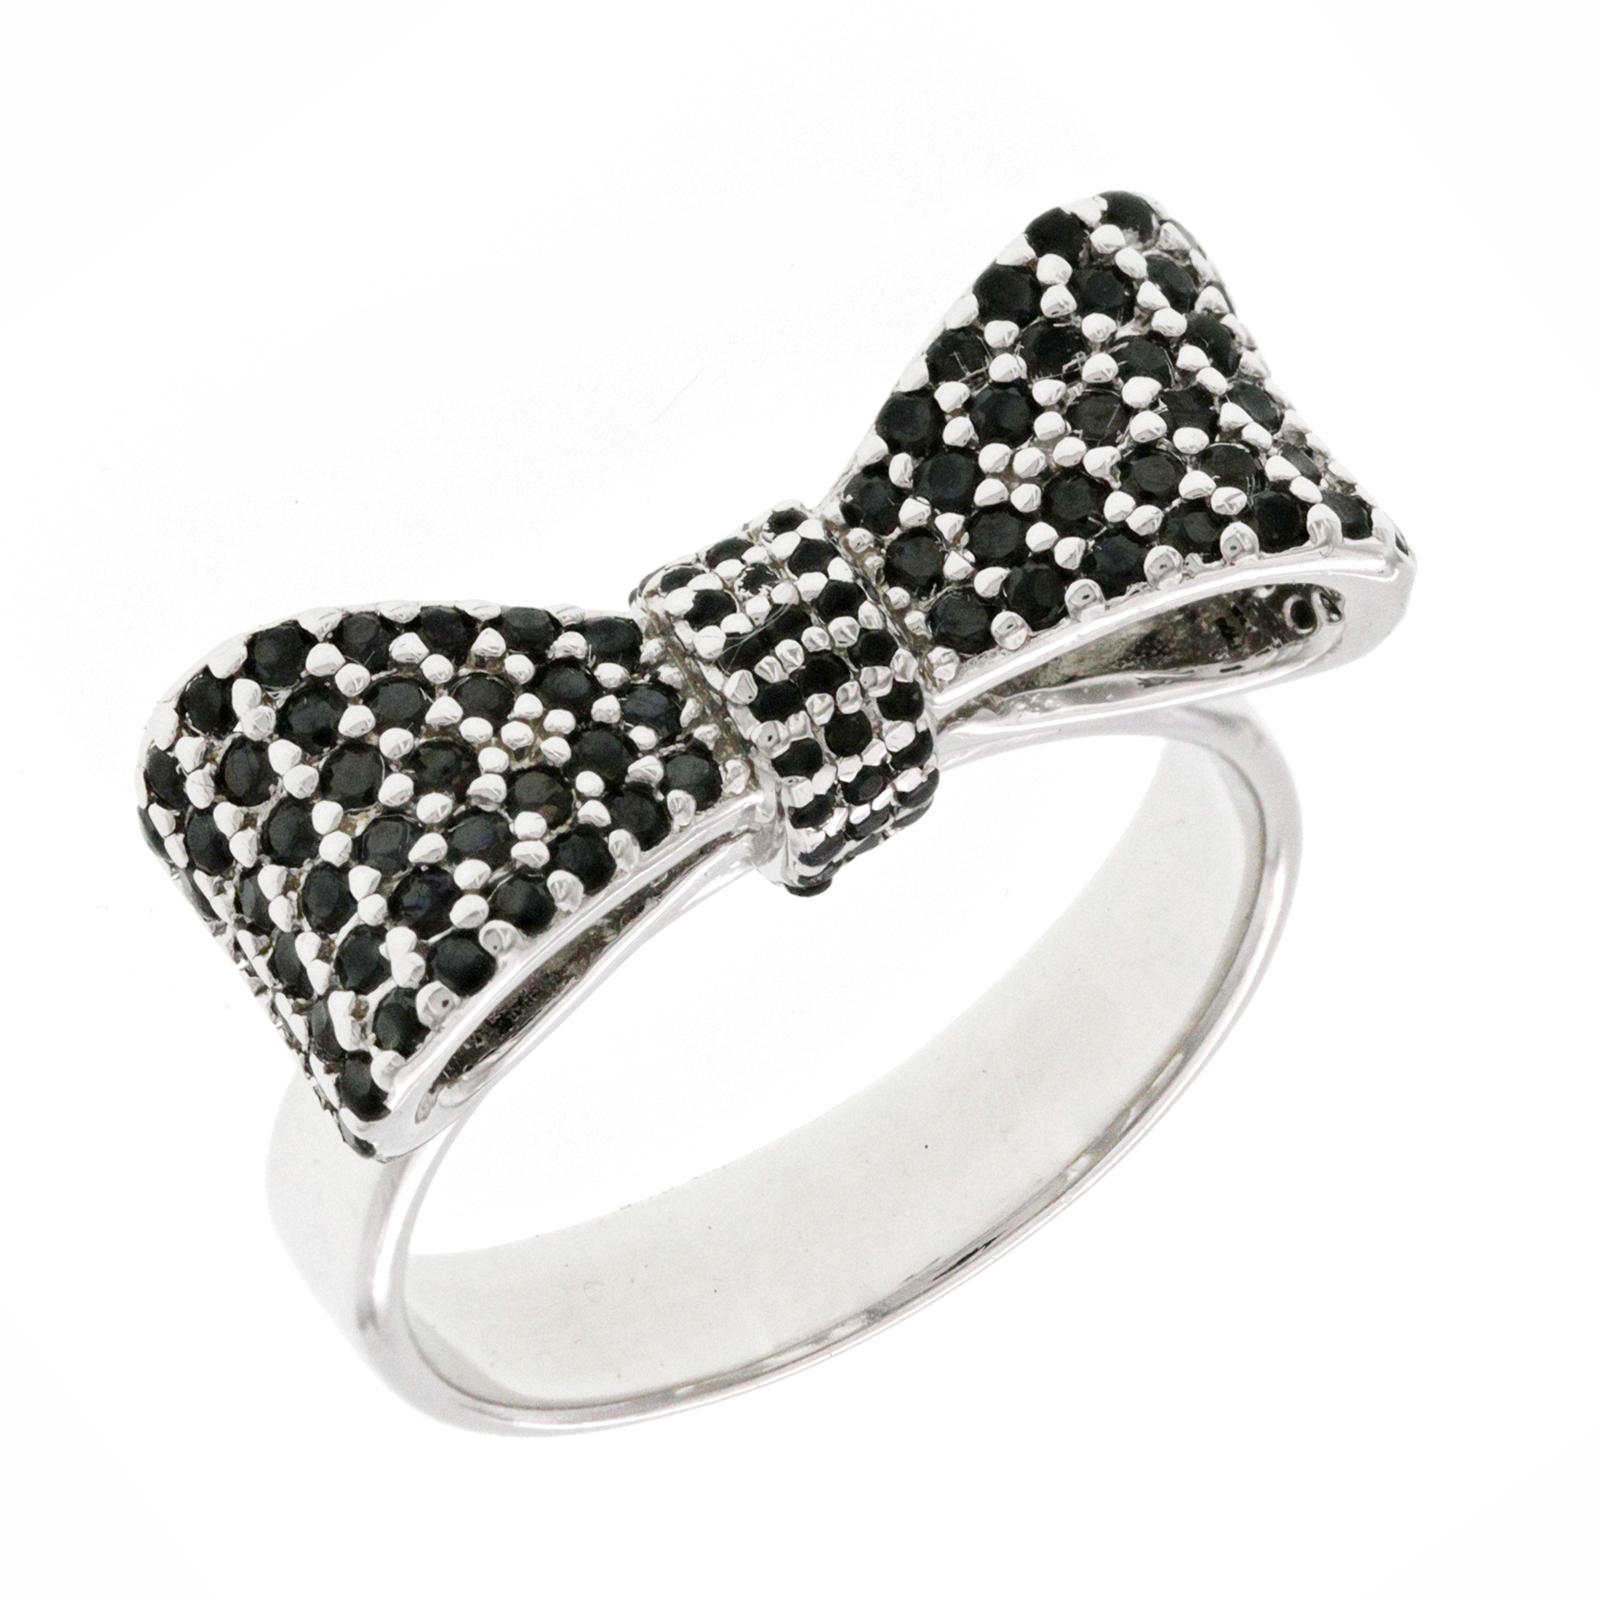 100% Authentic, 100% Customer Satisfaction

Top: 10 mm

Band Width: 5 mm

Metal: 925 Sterlings Silver

Size: 10

Hallmarks: Queen Baby 925

Total Weight: 8 Grams

Stone: Black CZ

Condition: New With Orginal Pouch

Estimated Retail Price: